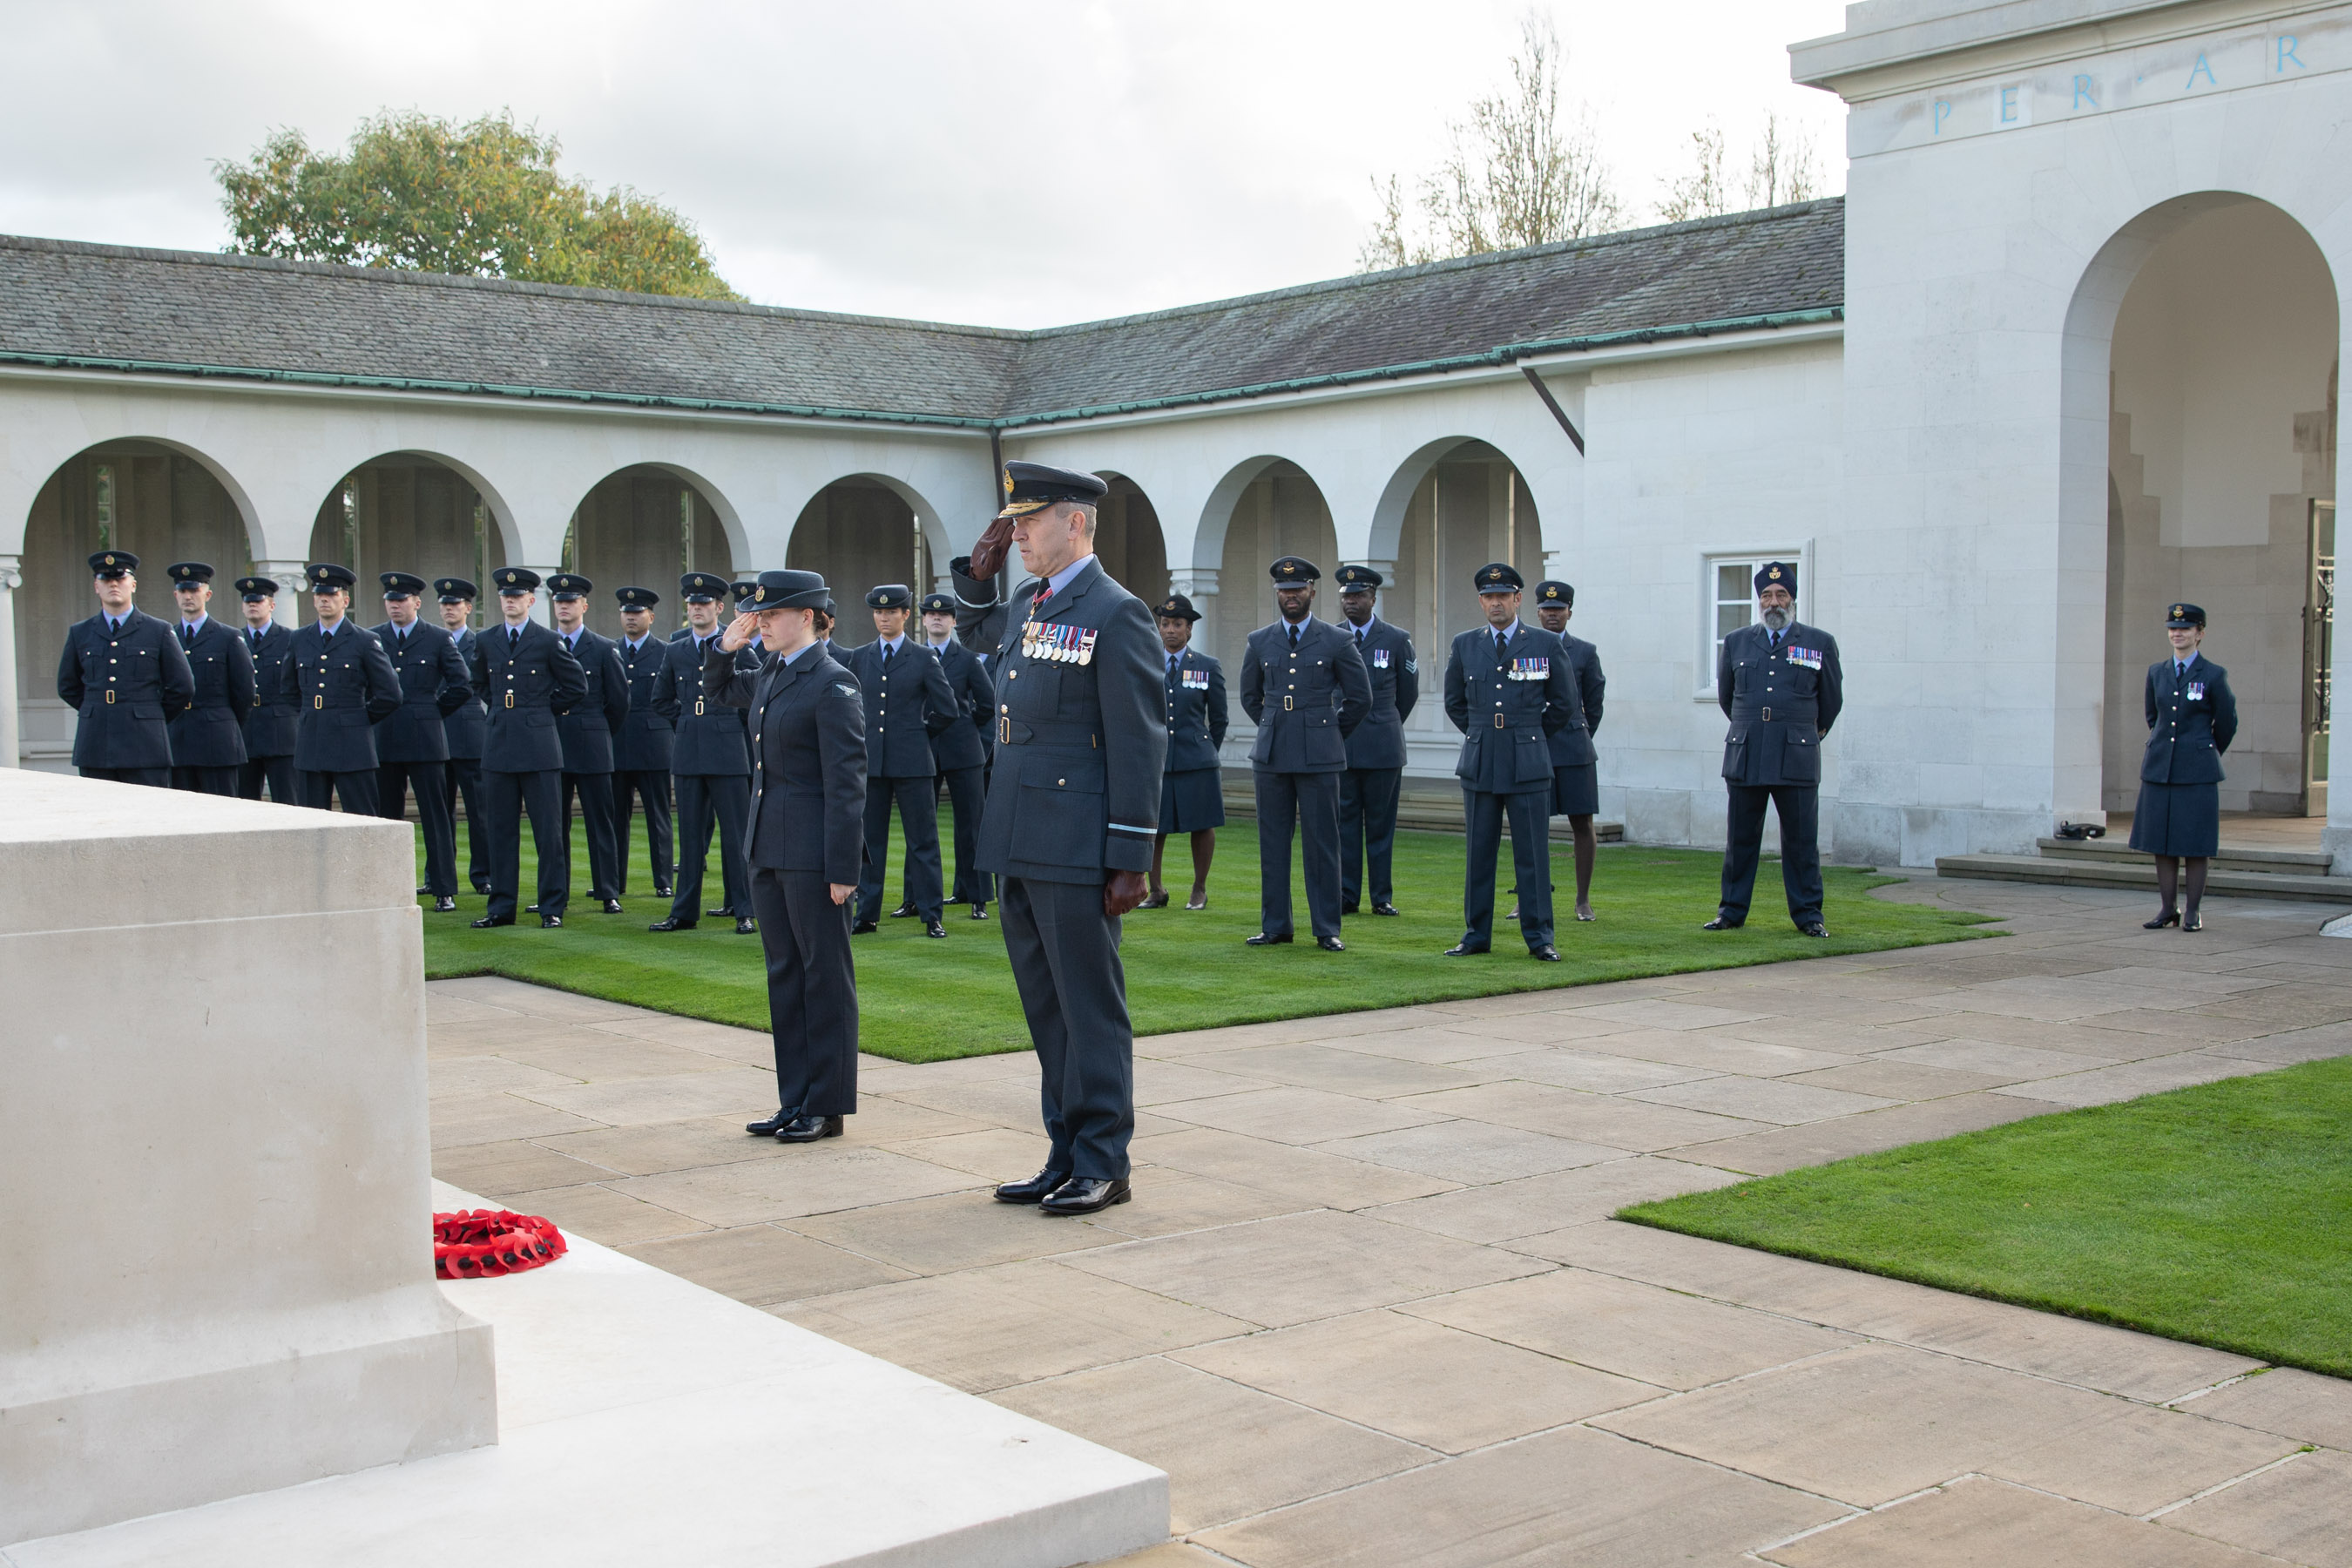 Image shows personnel at Runnymede memorial.